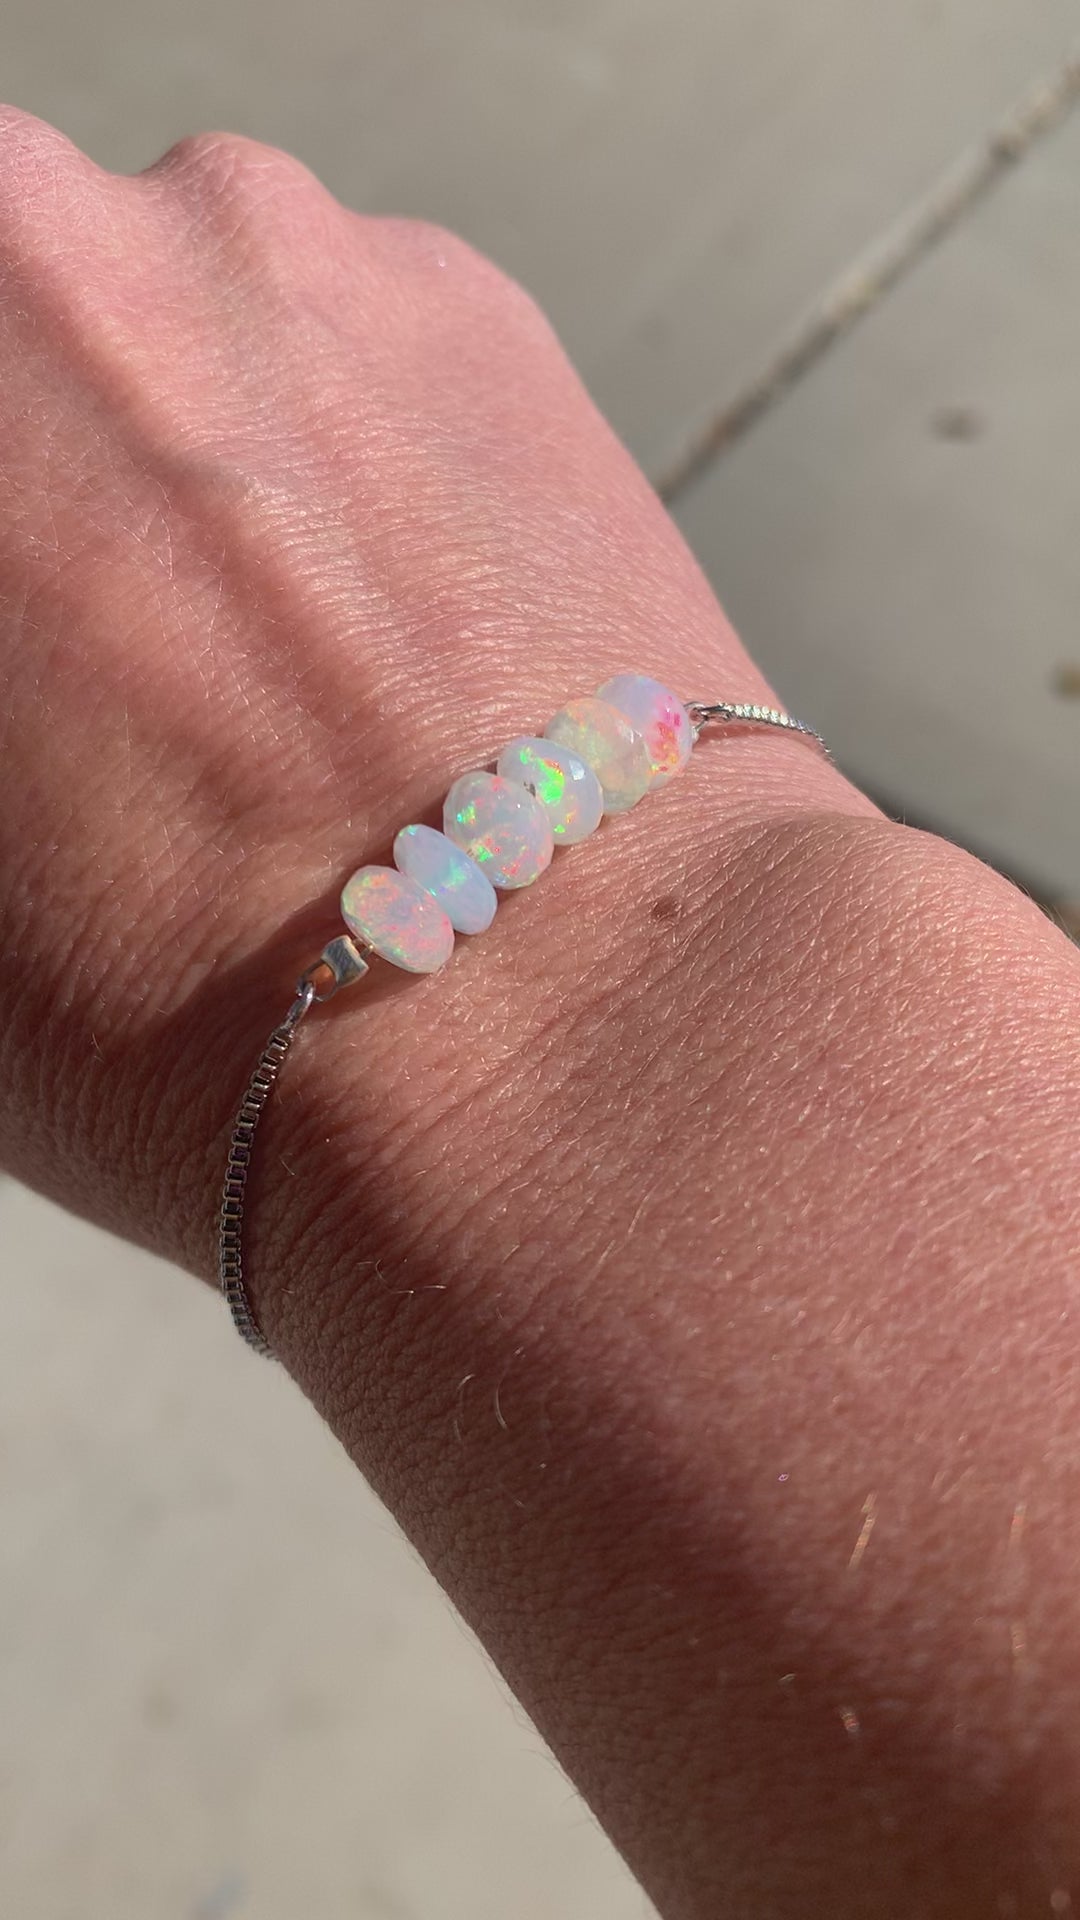 Healing Crystal Bracelets White Opals Video Showing Beauty of the Fire